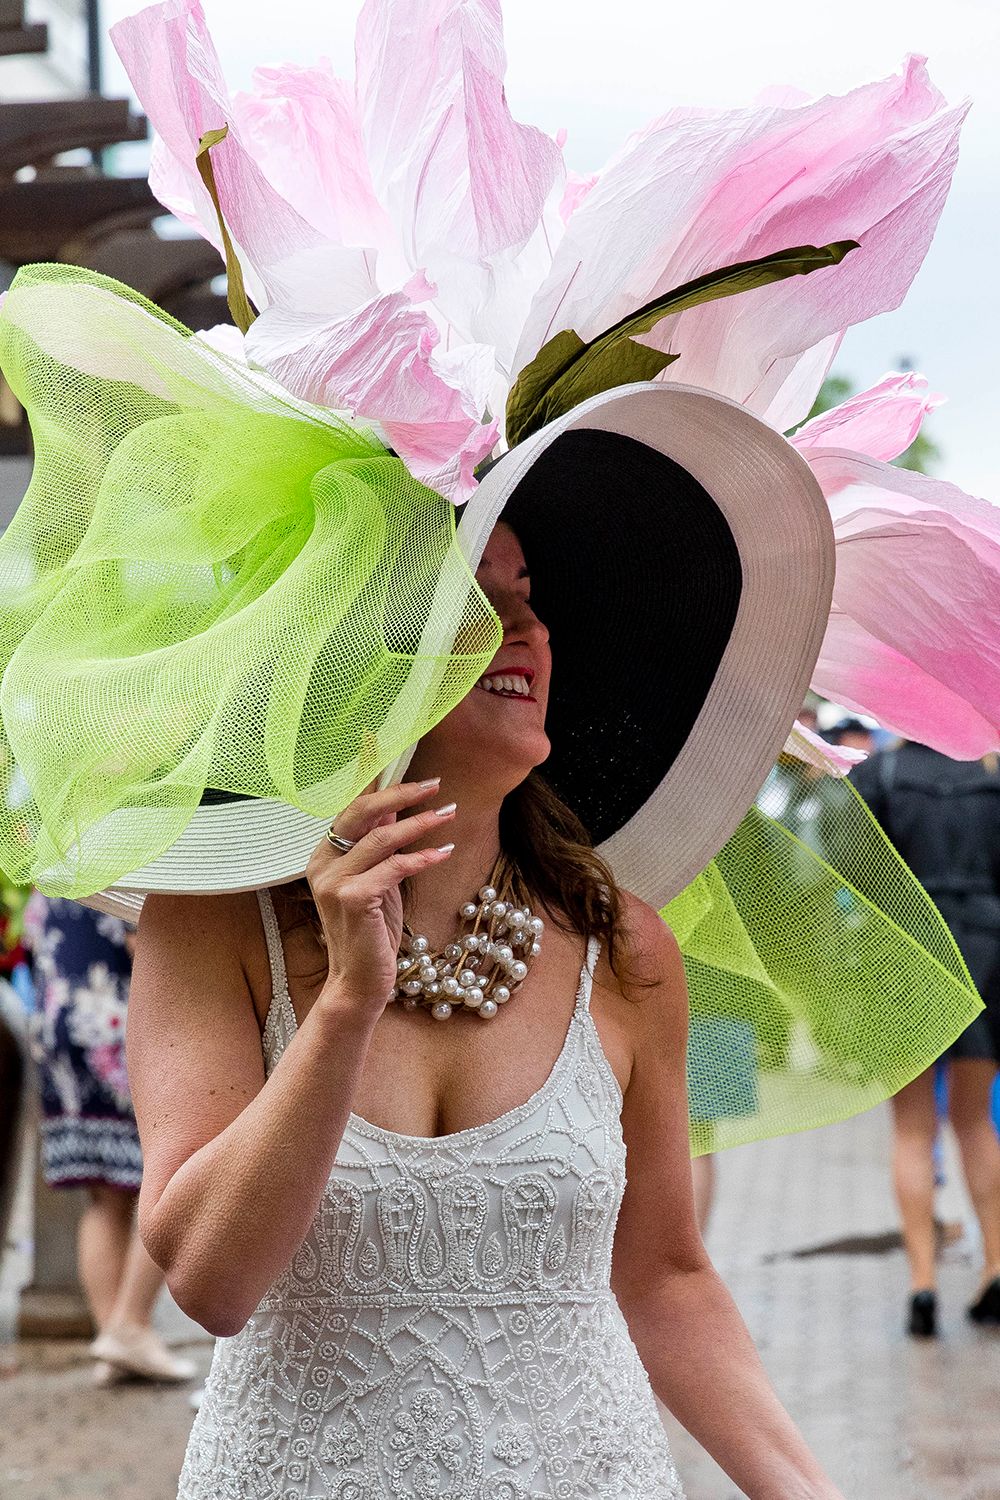 40 Craziest Kentucky Derby Hats Ever to Get You Excited for the